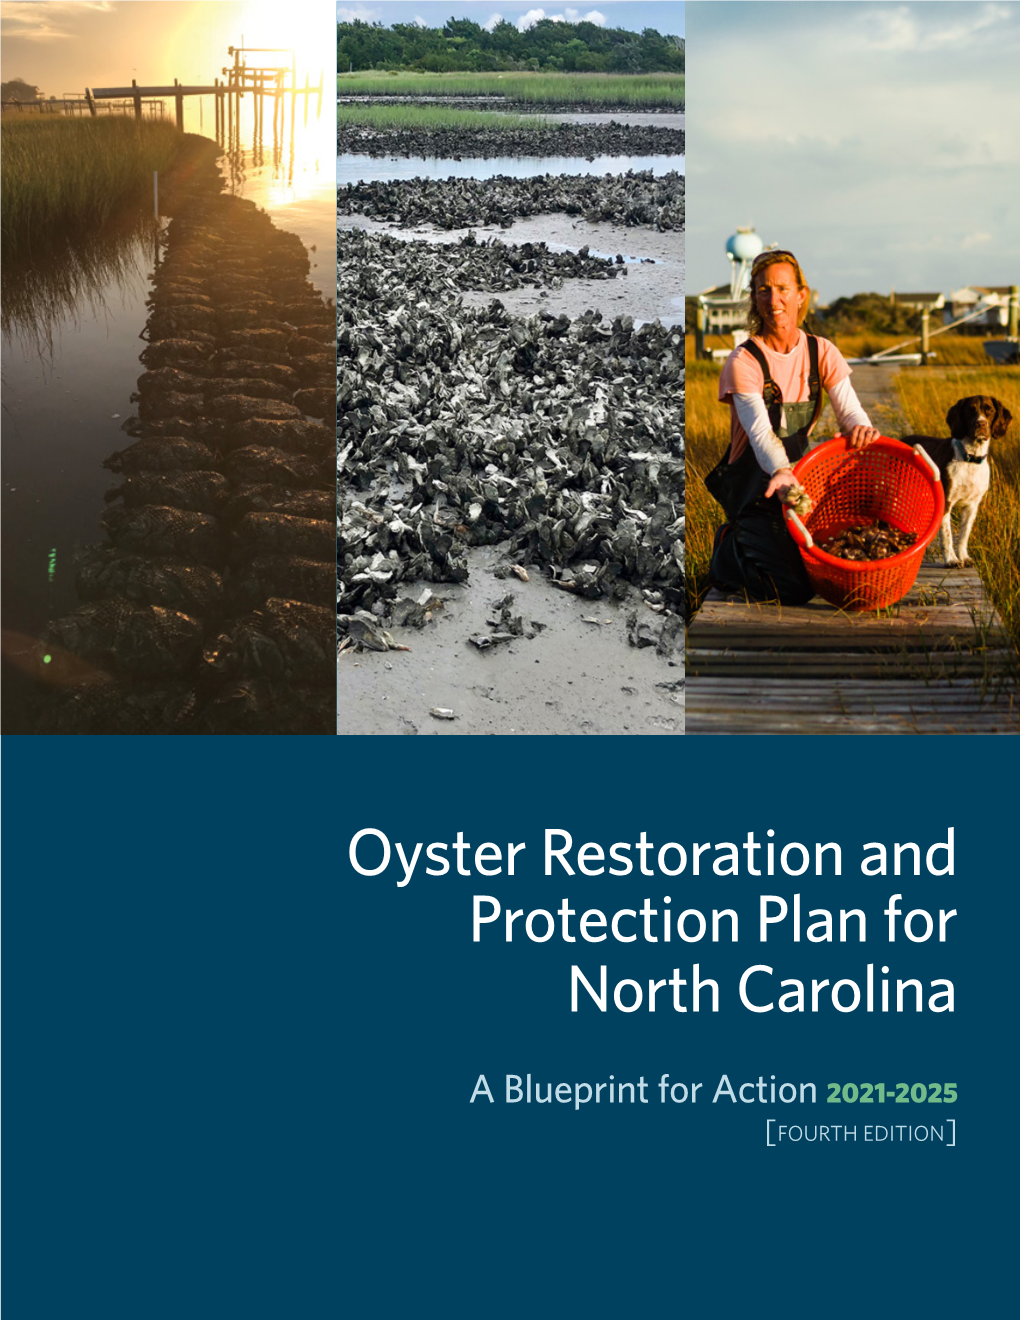 Oyster Restoration and Protection Plan for North Carolina